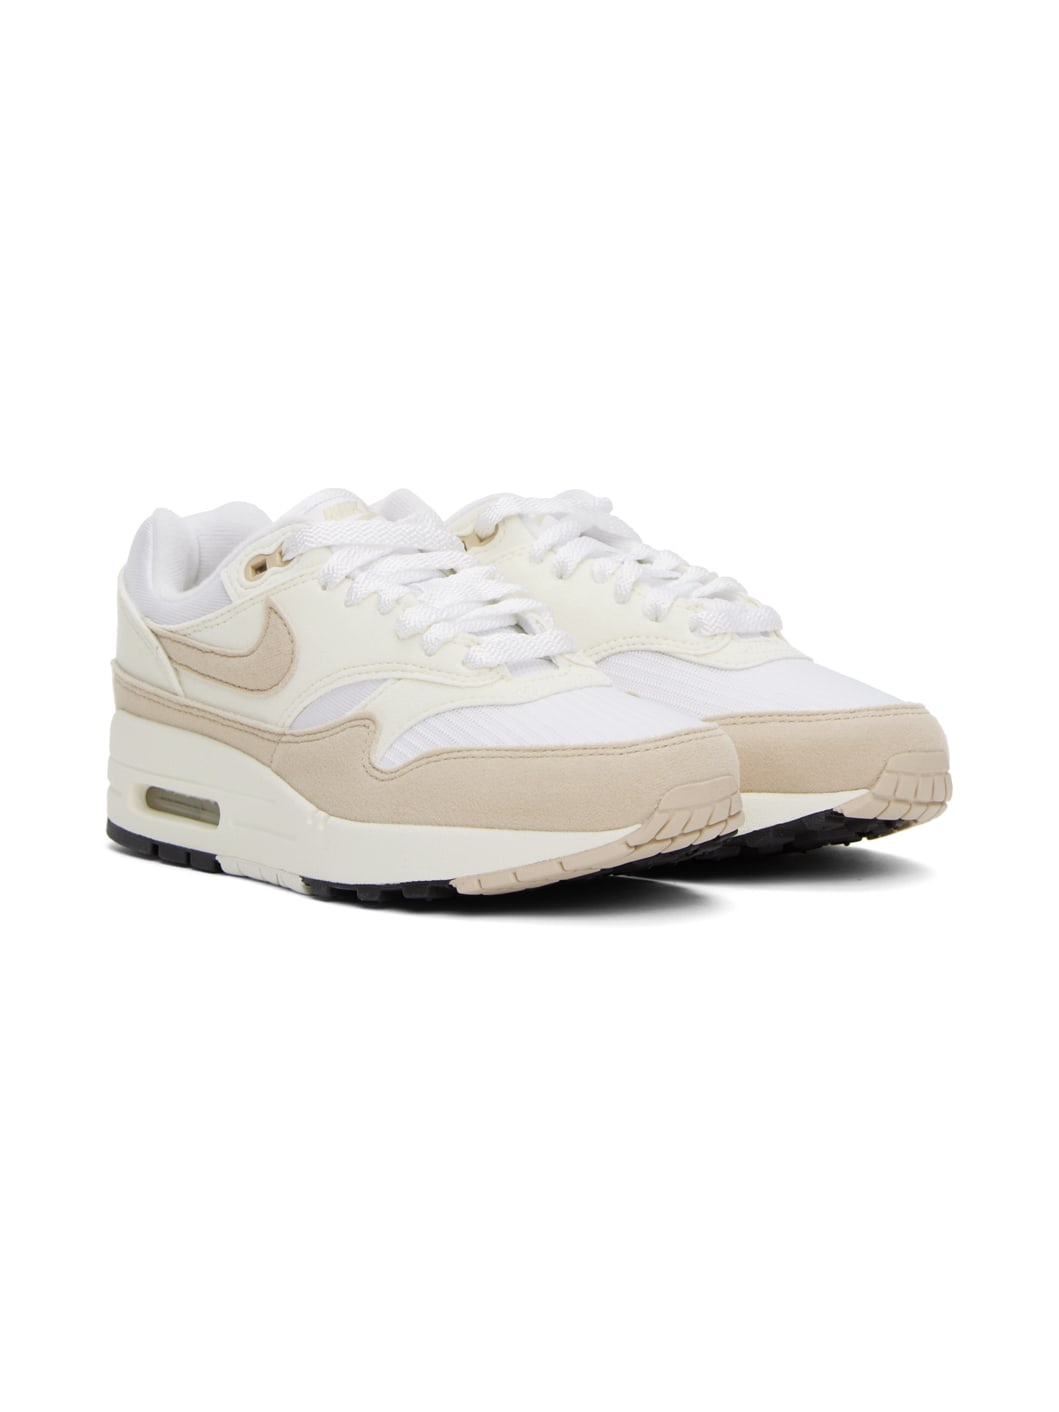 White & Beige Air Max 1 Sneakers - 4